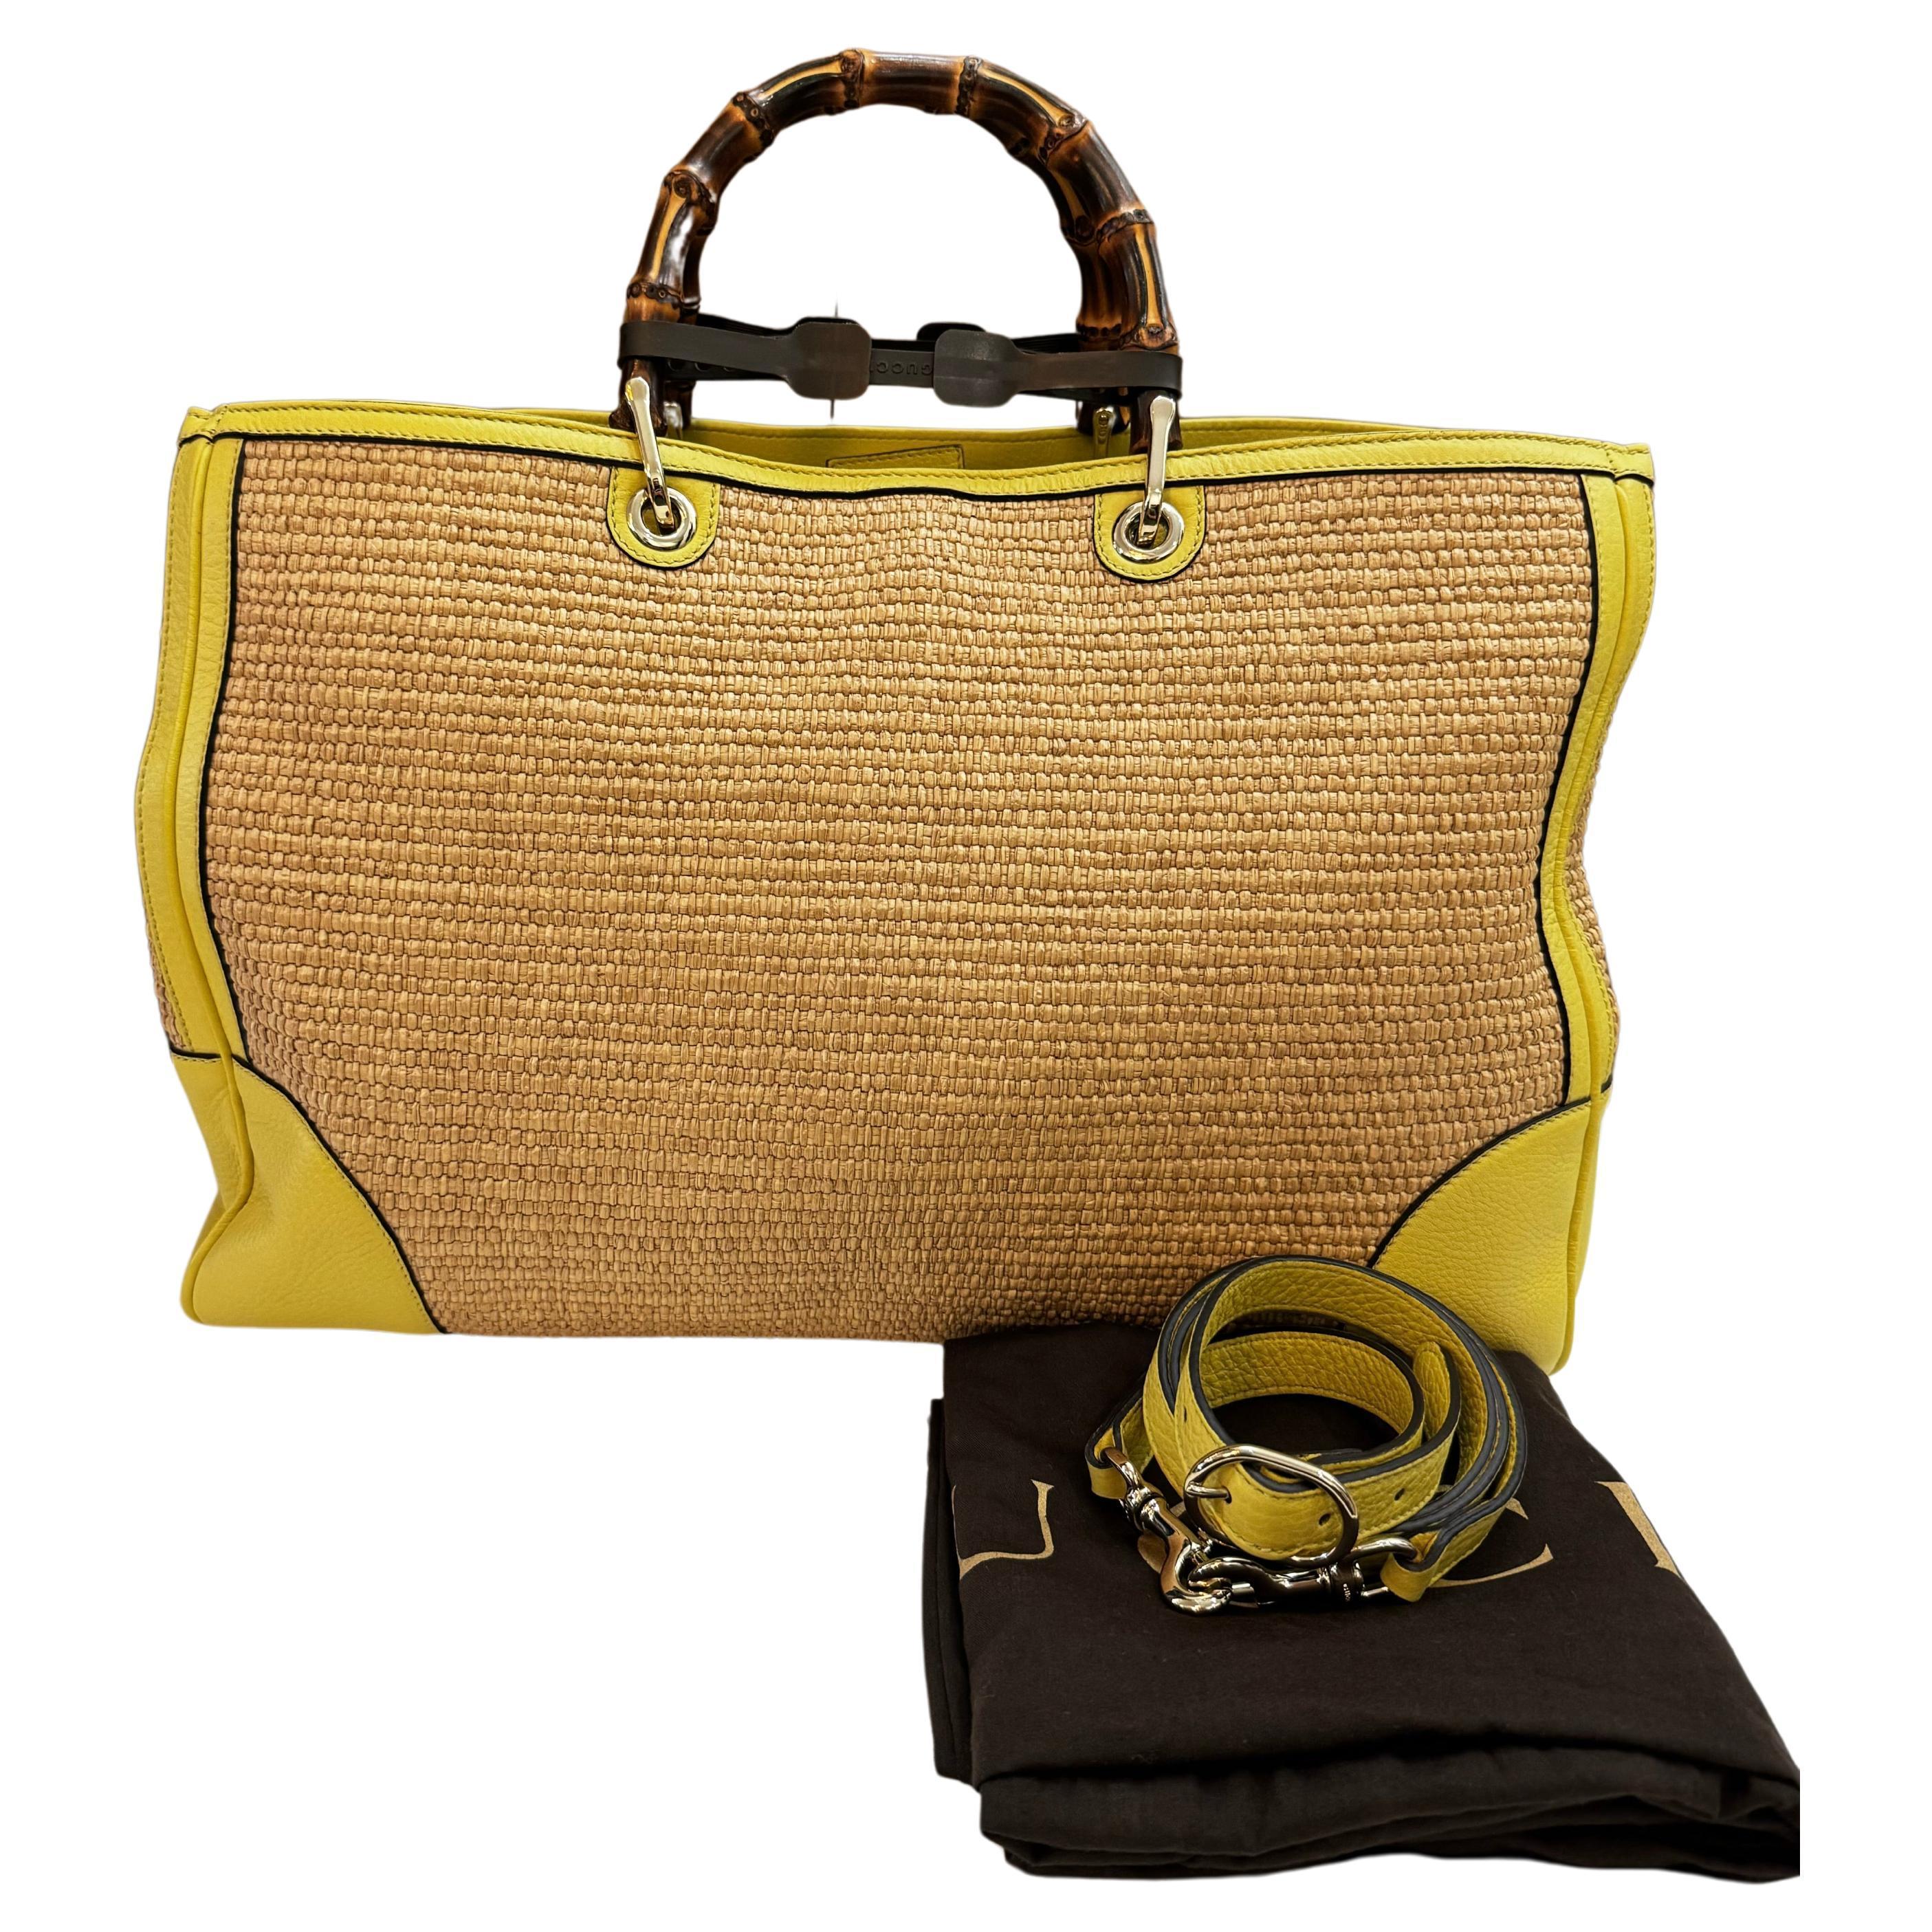 This large GUCCI raffia bamboo tote bag is crafted of woven straw in its natural color with yellow calfskin leather featuring gold toned hardware and sturdy bamboo handles. Wide top magnetic closures open to a striped canvas interior featuring two